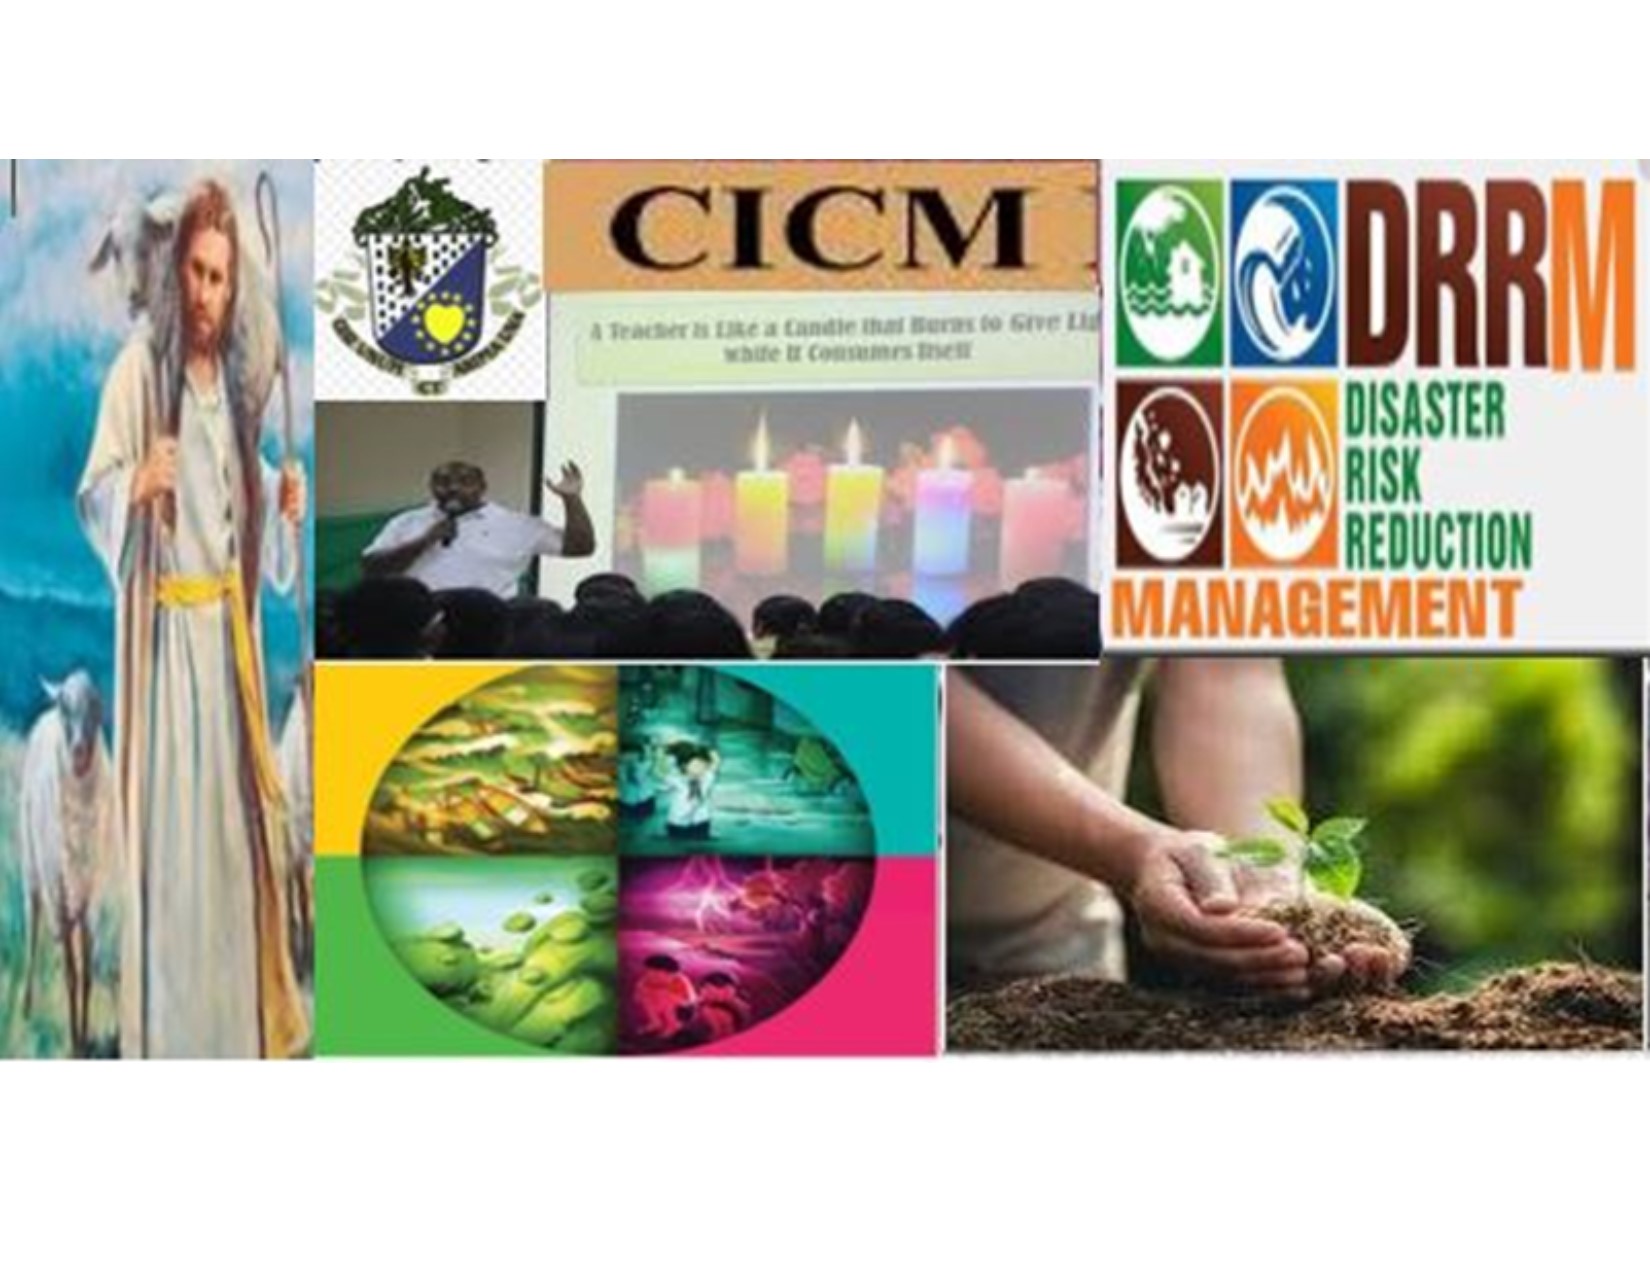 CFE 105b  6455 (7:30-9:00 T) CICM in Action: Environmental Protection Management (Disaster Risk Reduction Management)